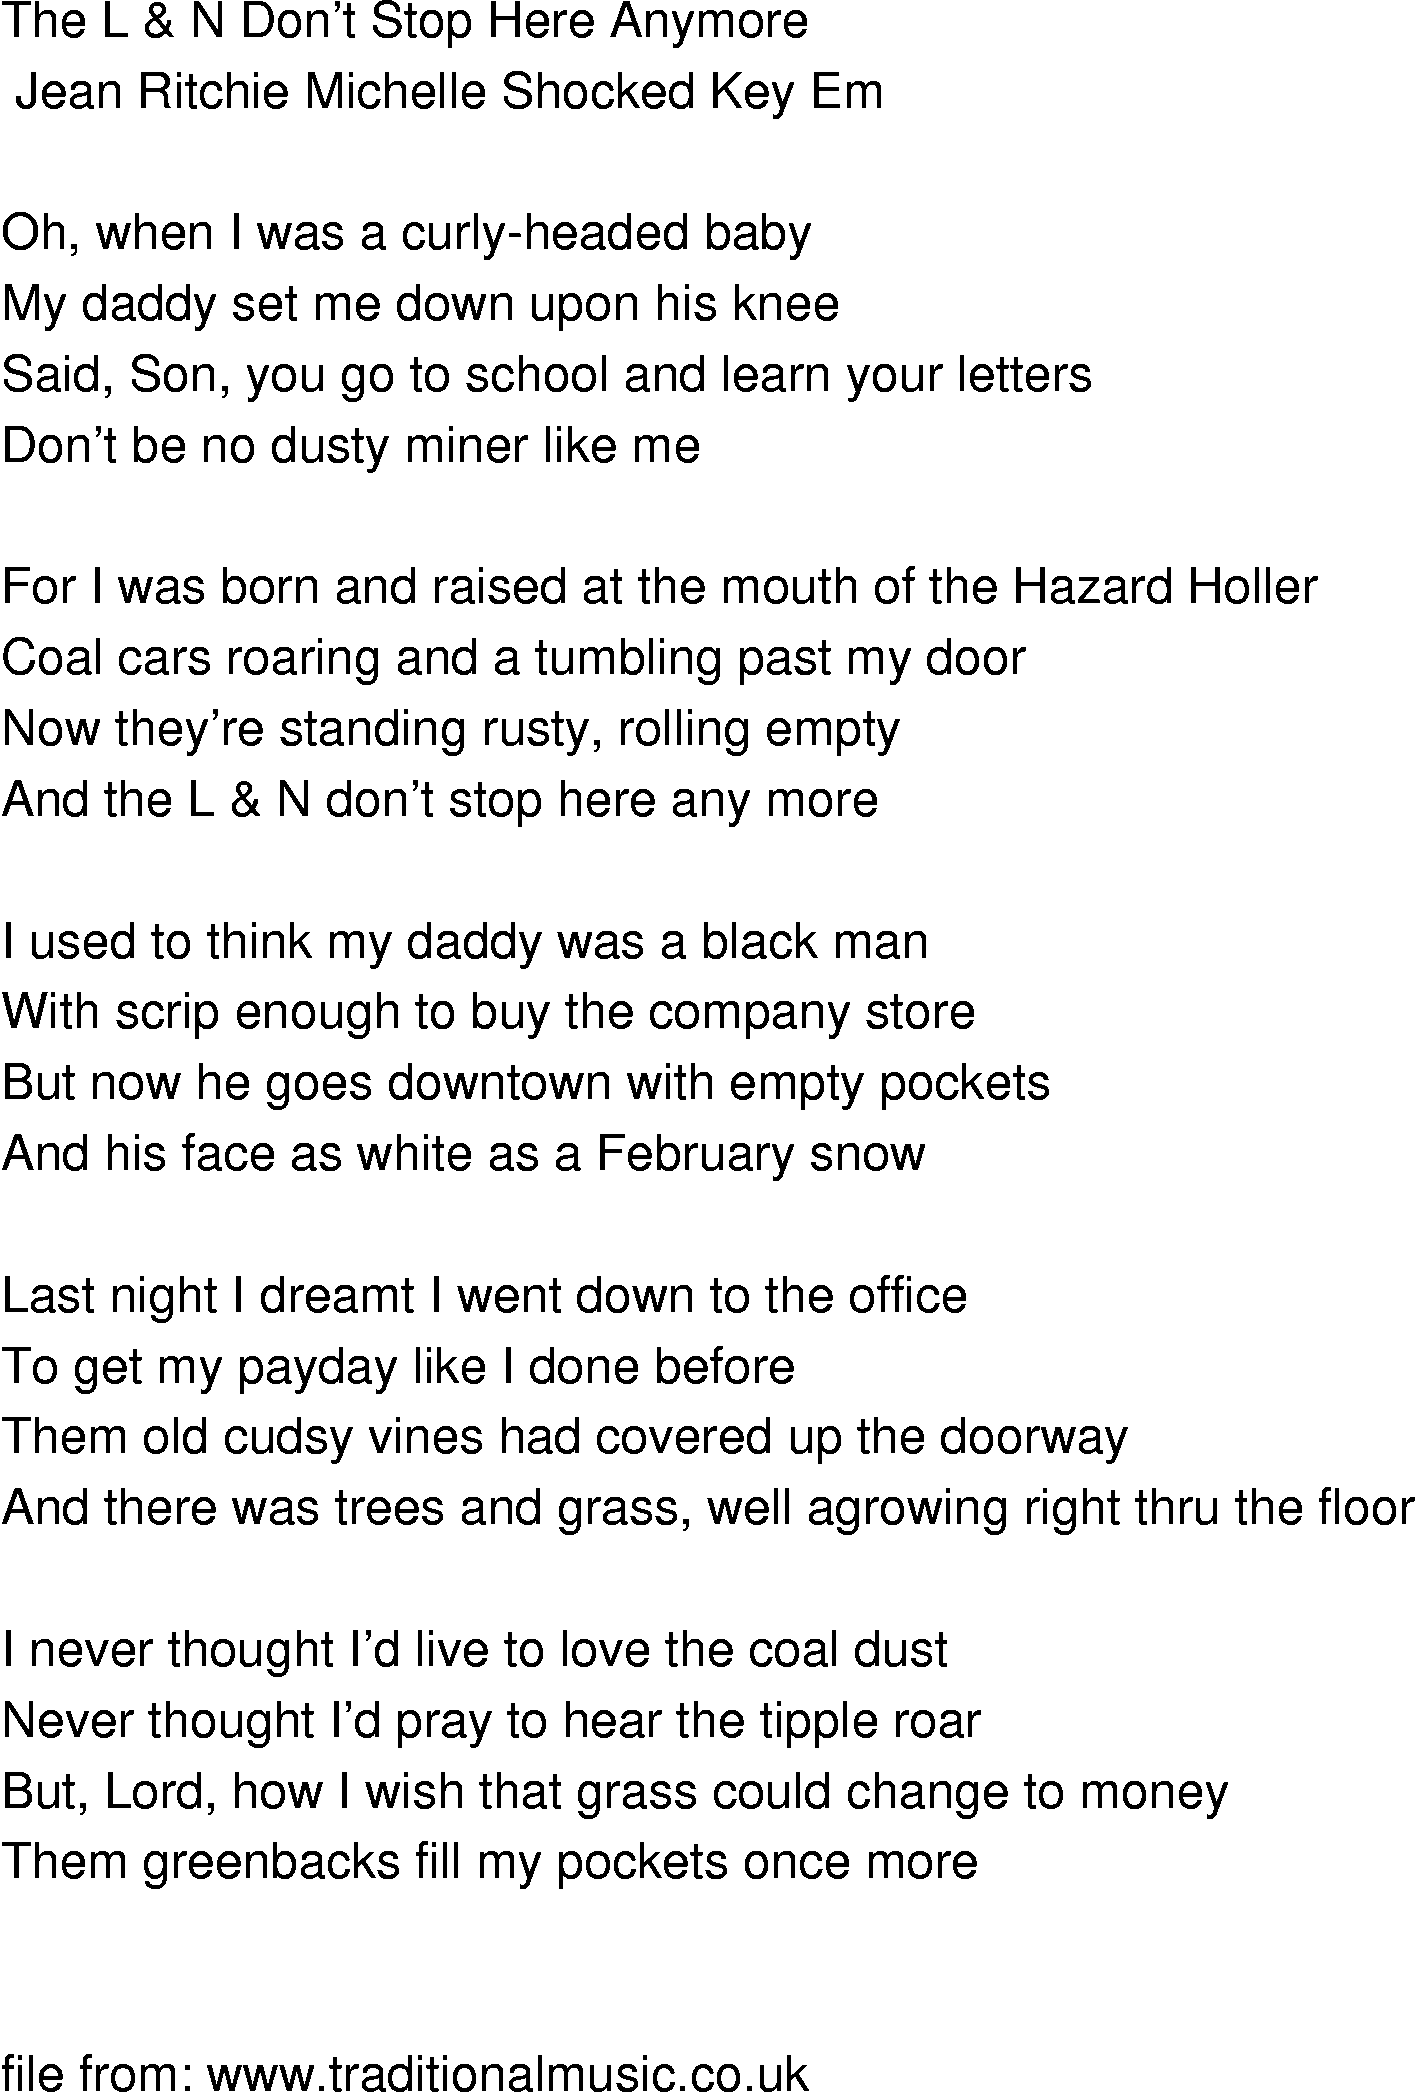 Old-Time (oldtimey) Song Lyrics - the l & n dont stop here anymore